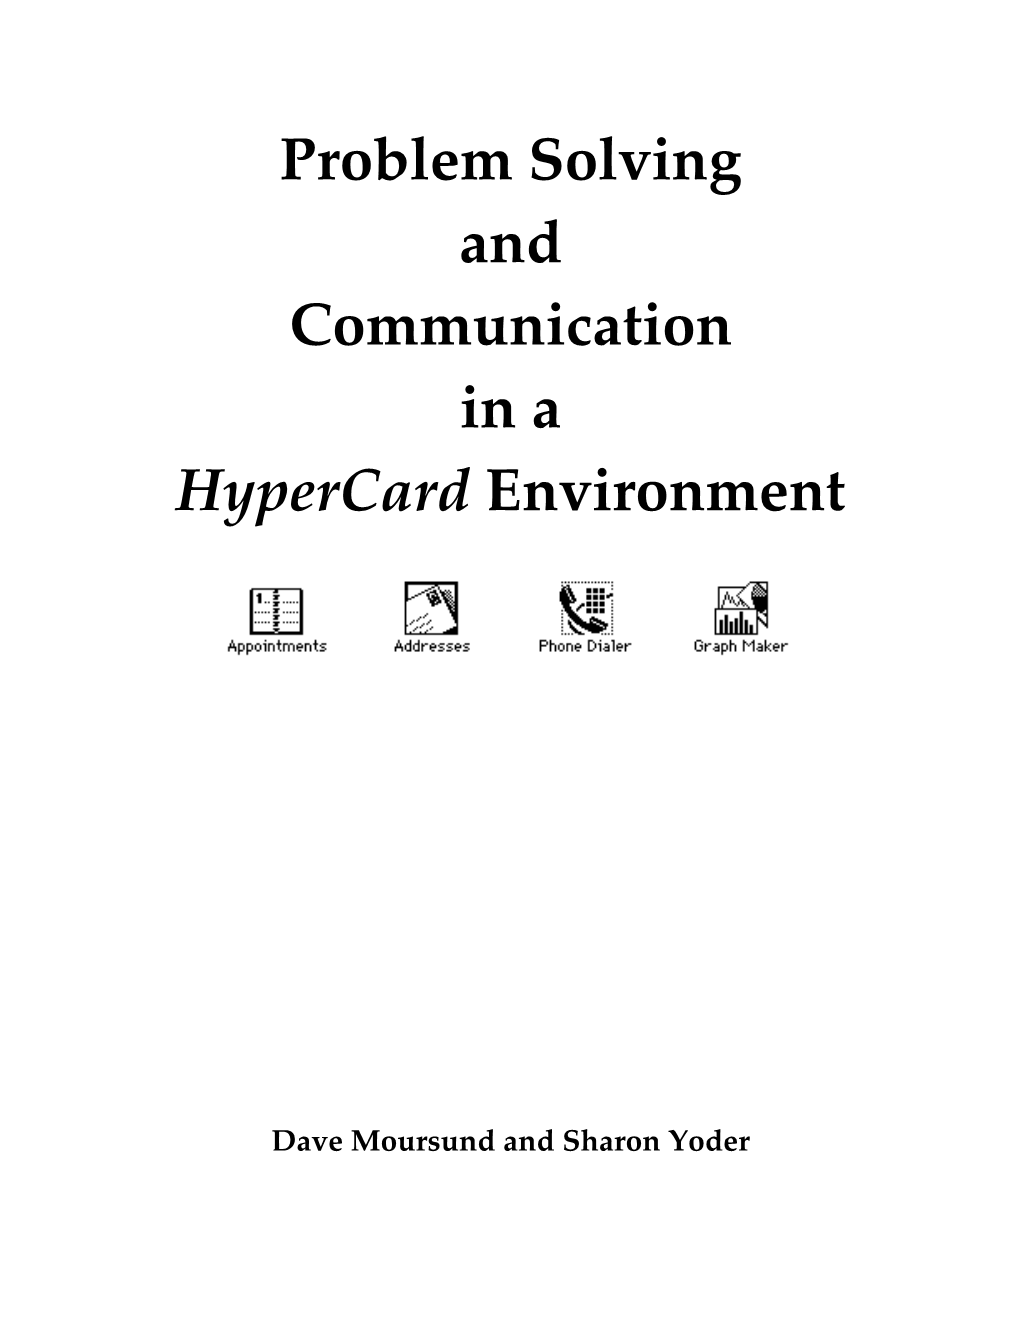 Problem Solving and Communication in a Hypercard Environment